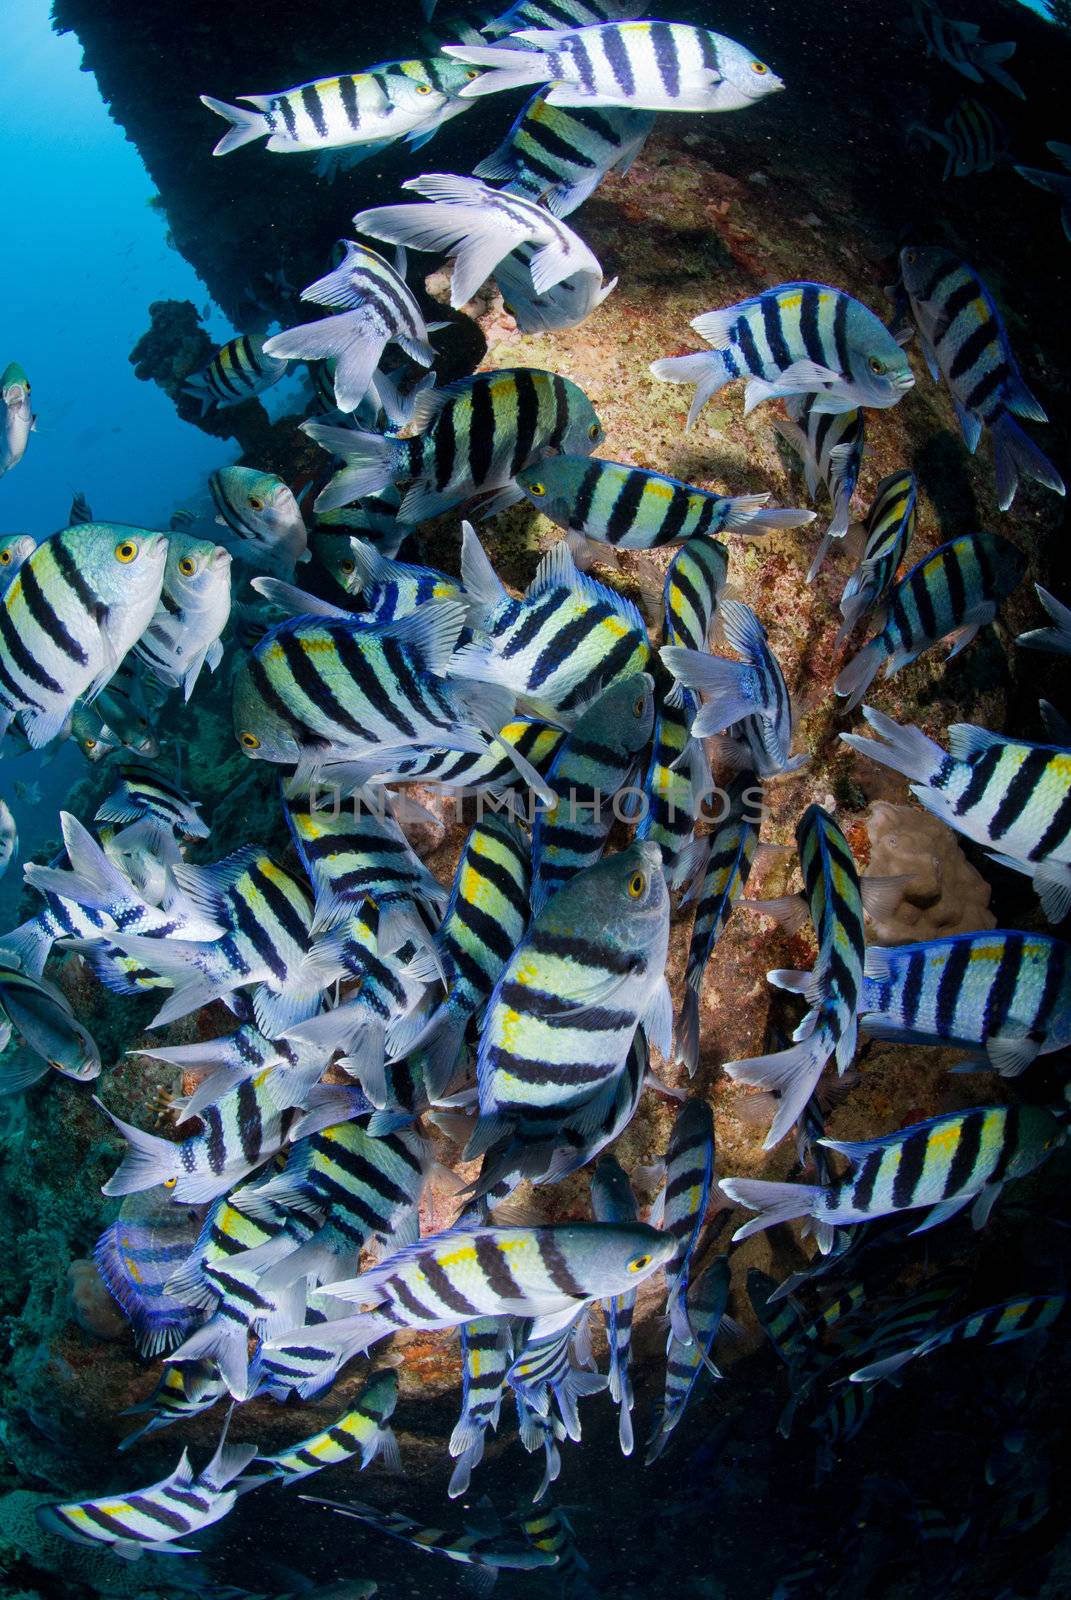 Large shoal of Tropical Fish by markdoherty